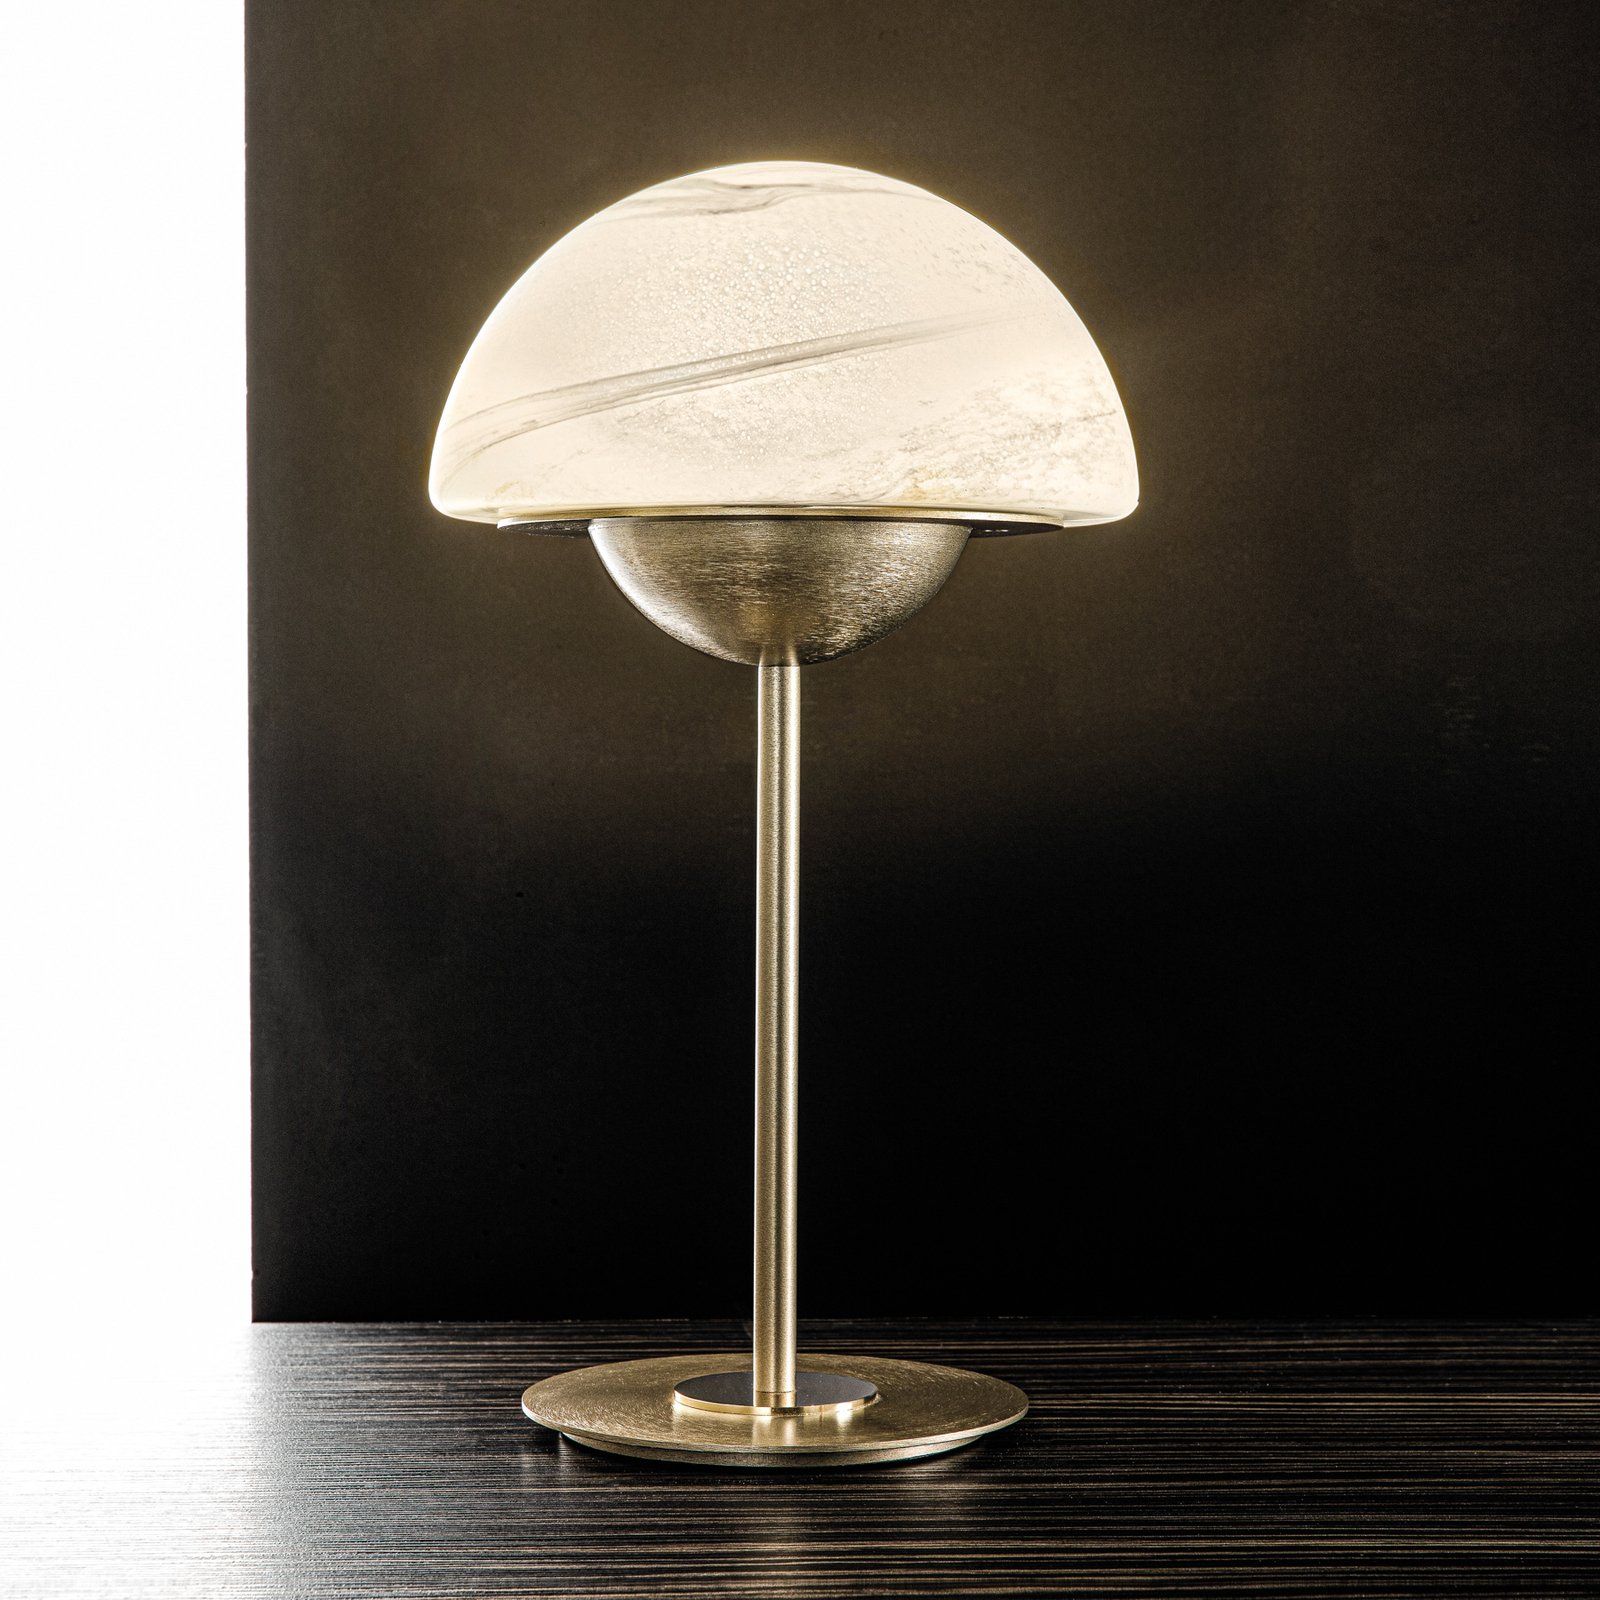 Moon table lamp, Murano glass, alabaster